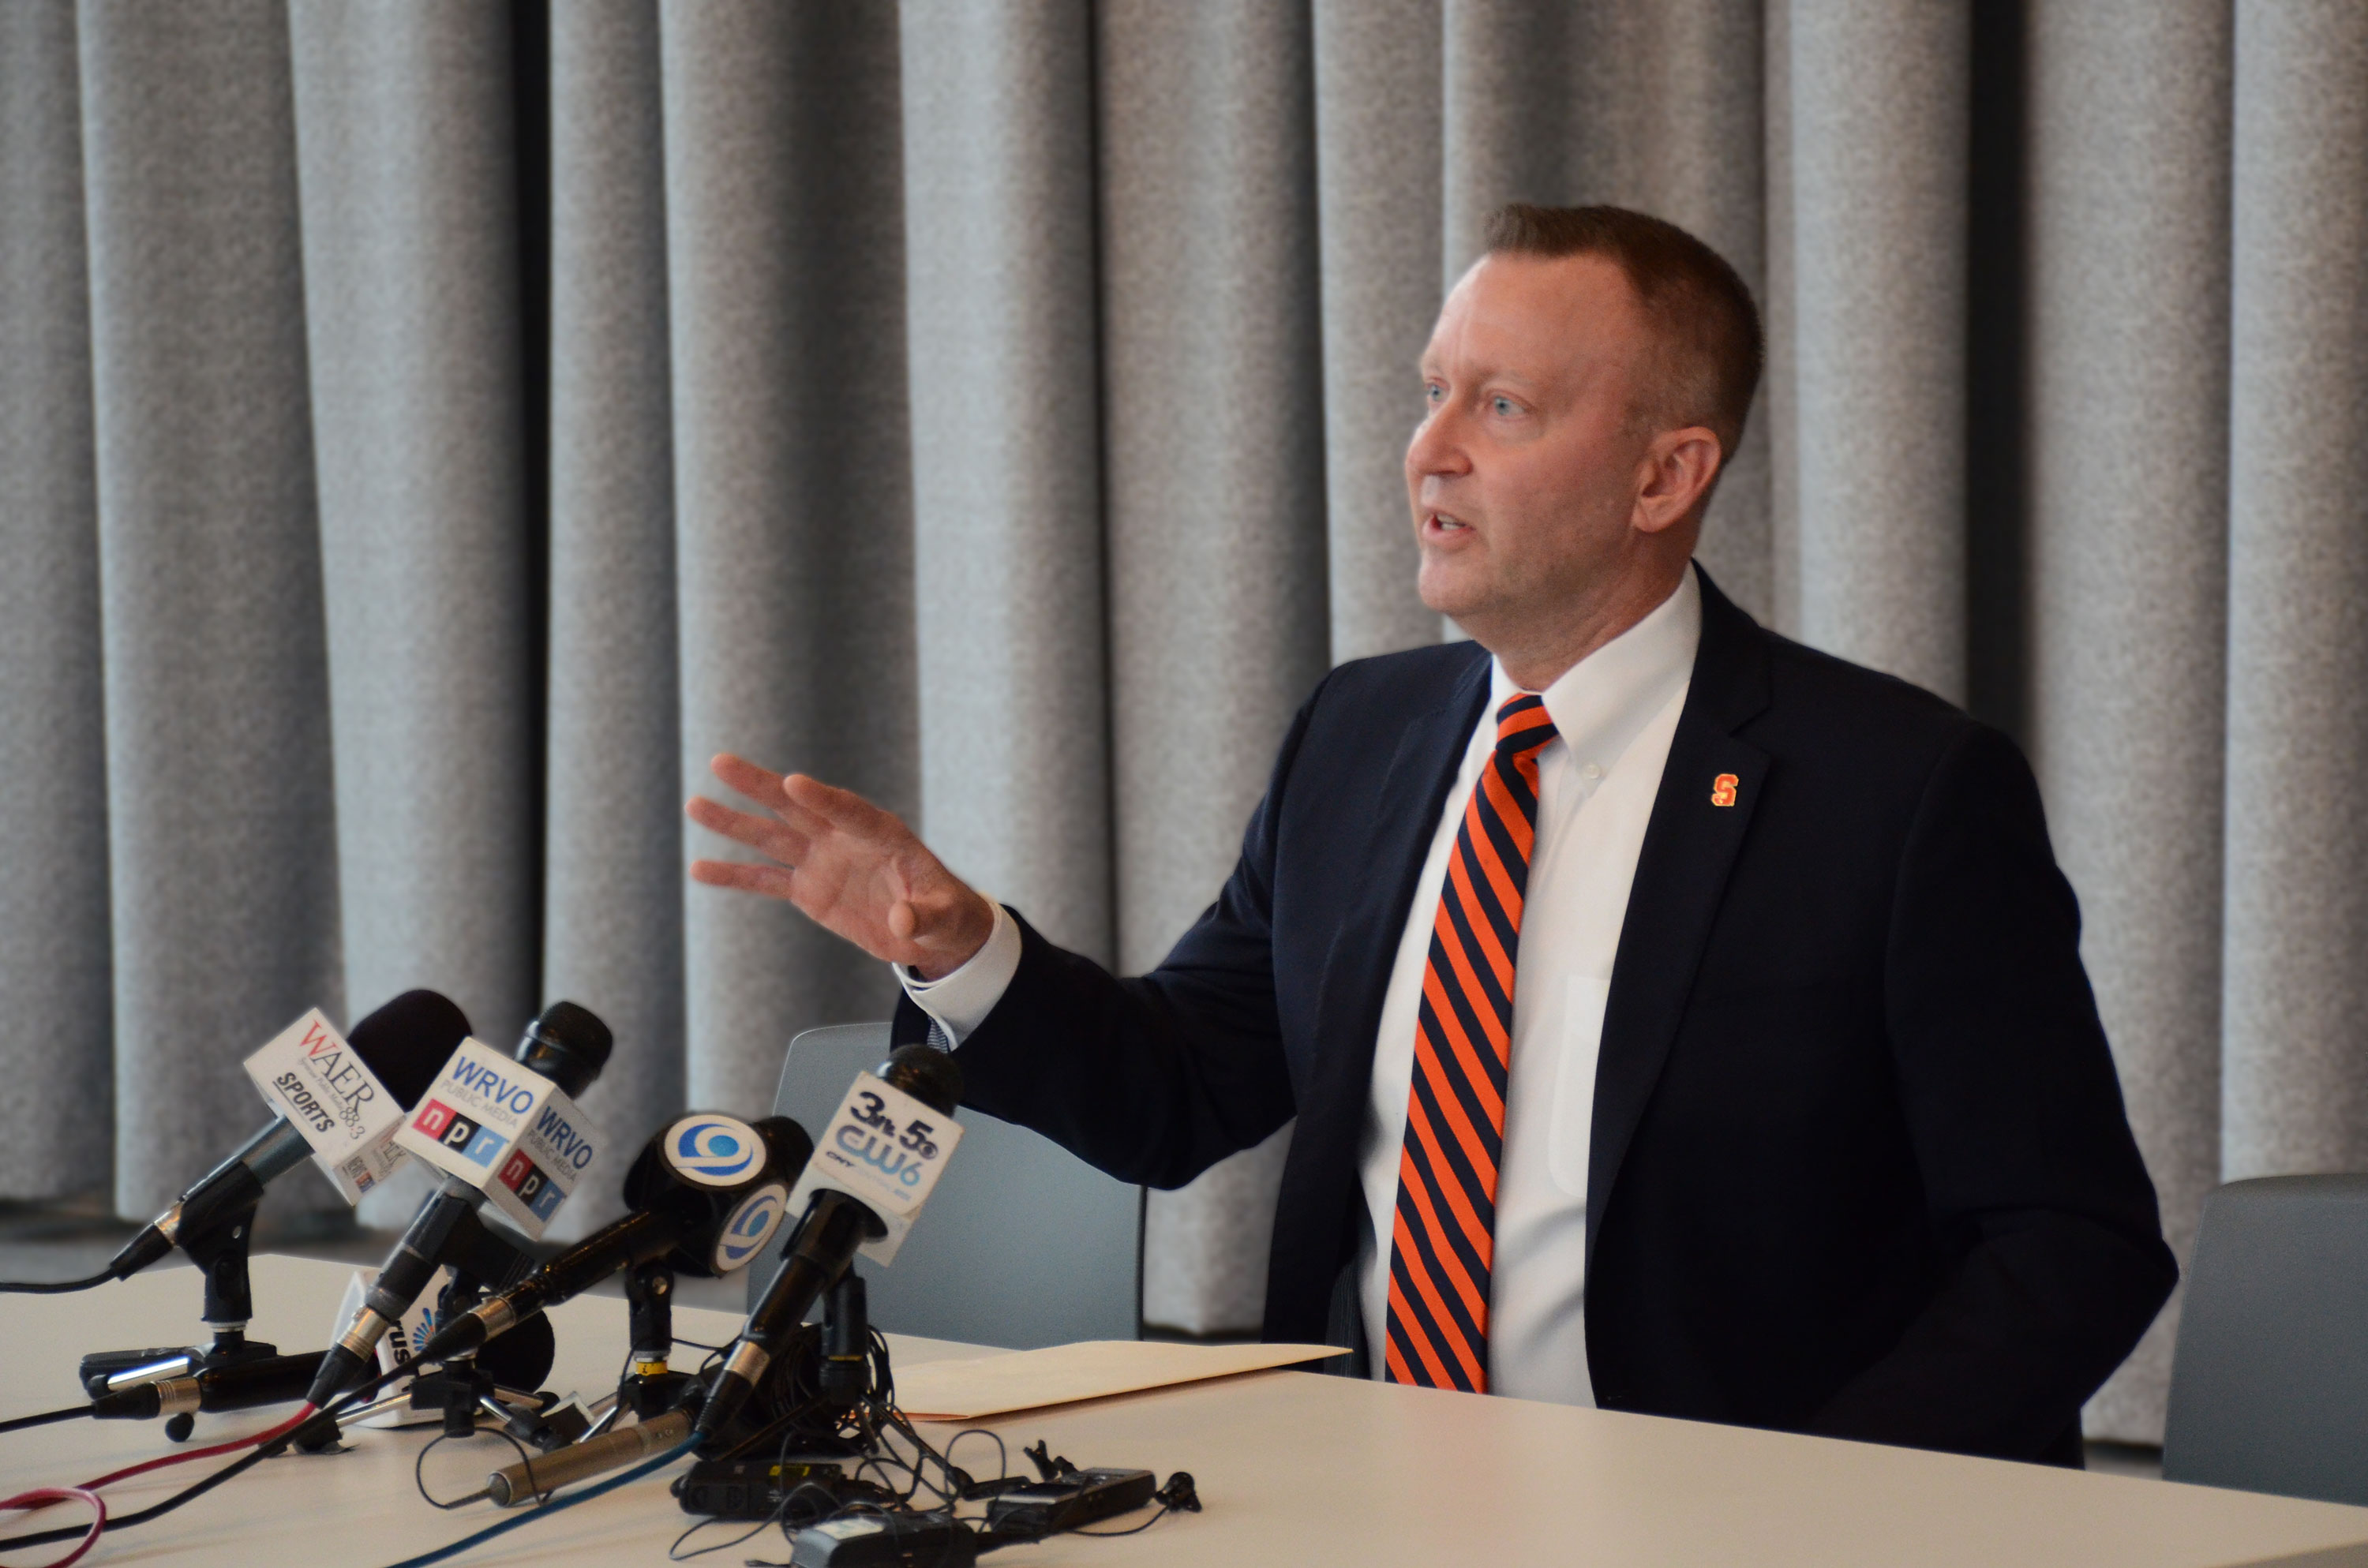 SU Vice Chancellor Michael Haynie announces on March 10 that classes will move to online learning through March 30, 2020, because of coronavirus concerns.